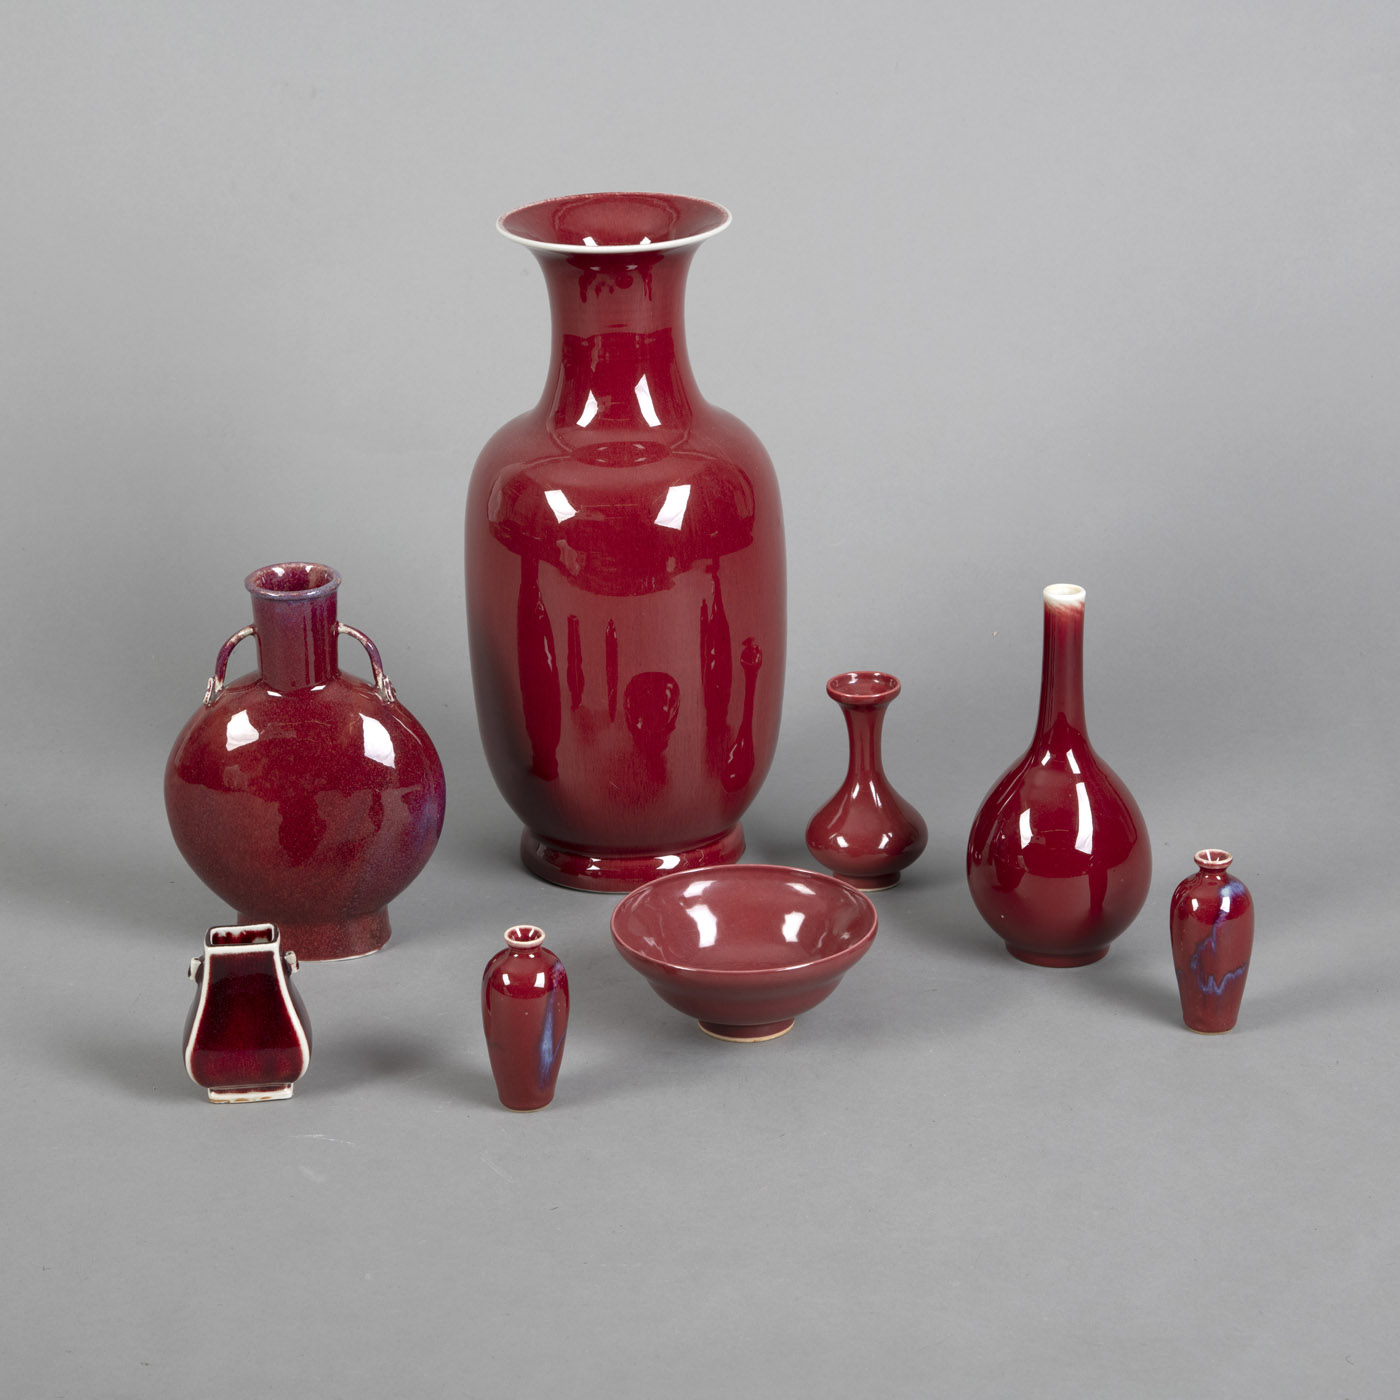 <b>LOT OF RED-GLAZED PORCELAIN, PARTLY LAVENDER BLUE SPOTTED: SEVEN VASES AND A BOWL</b>